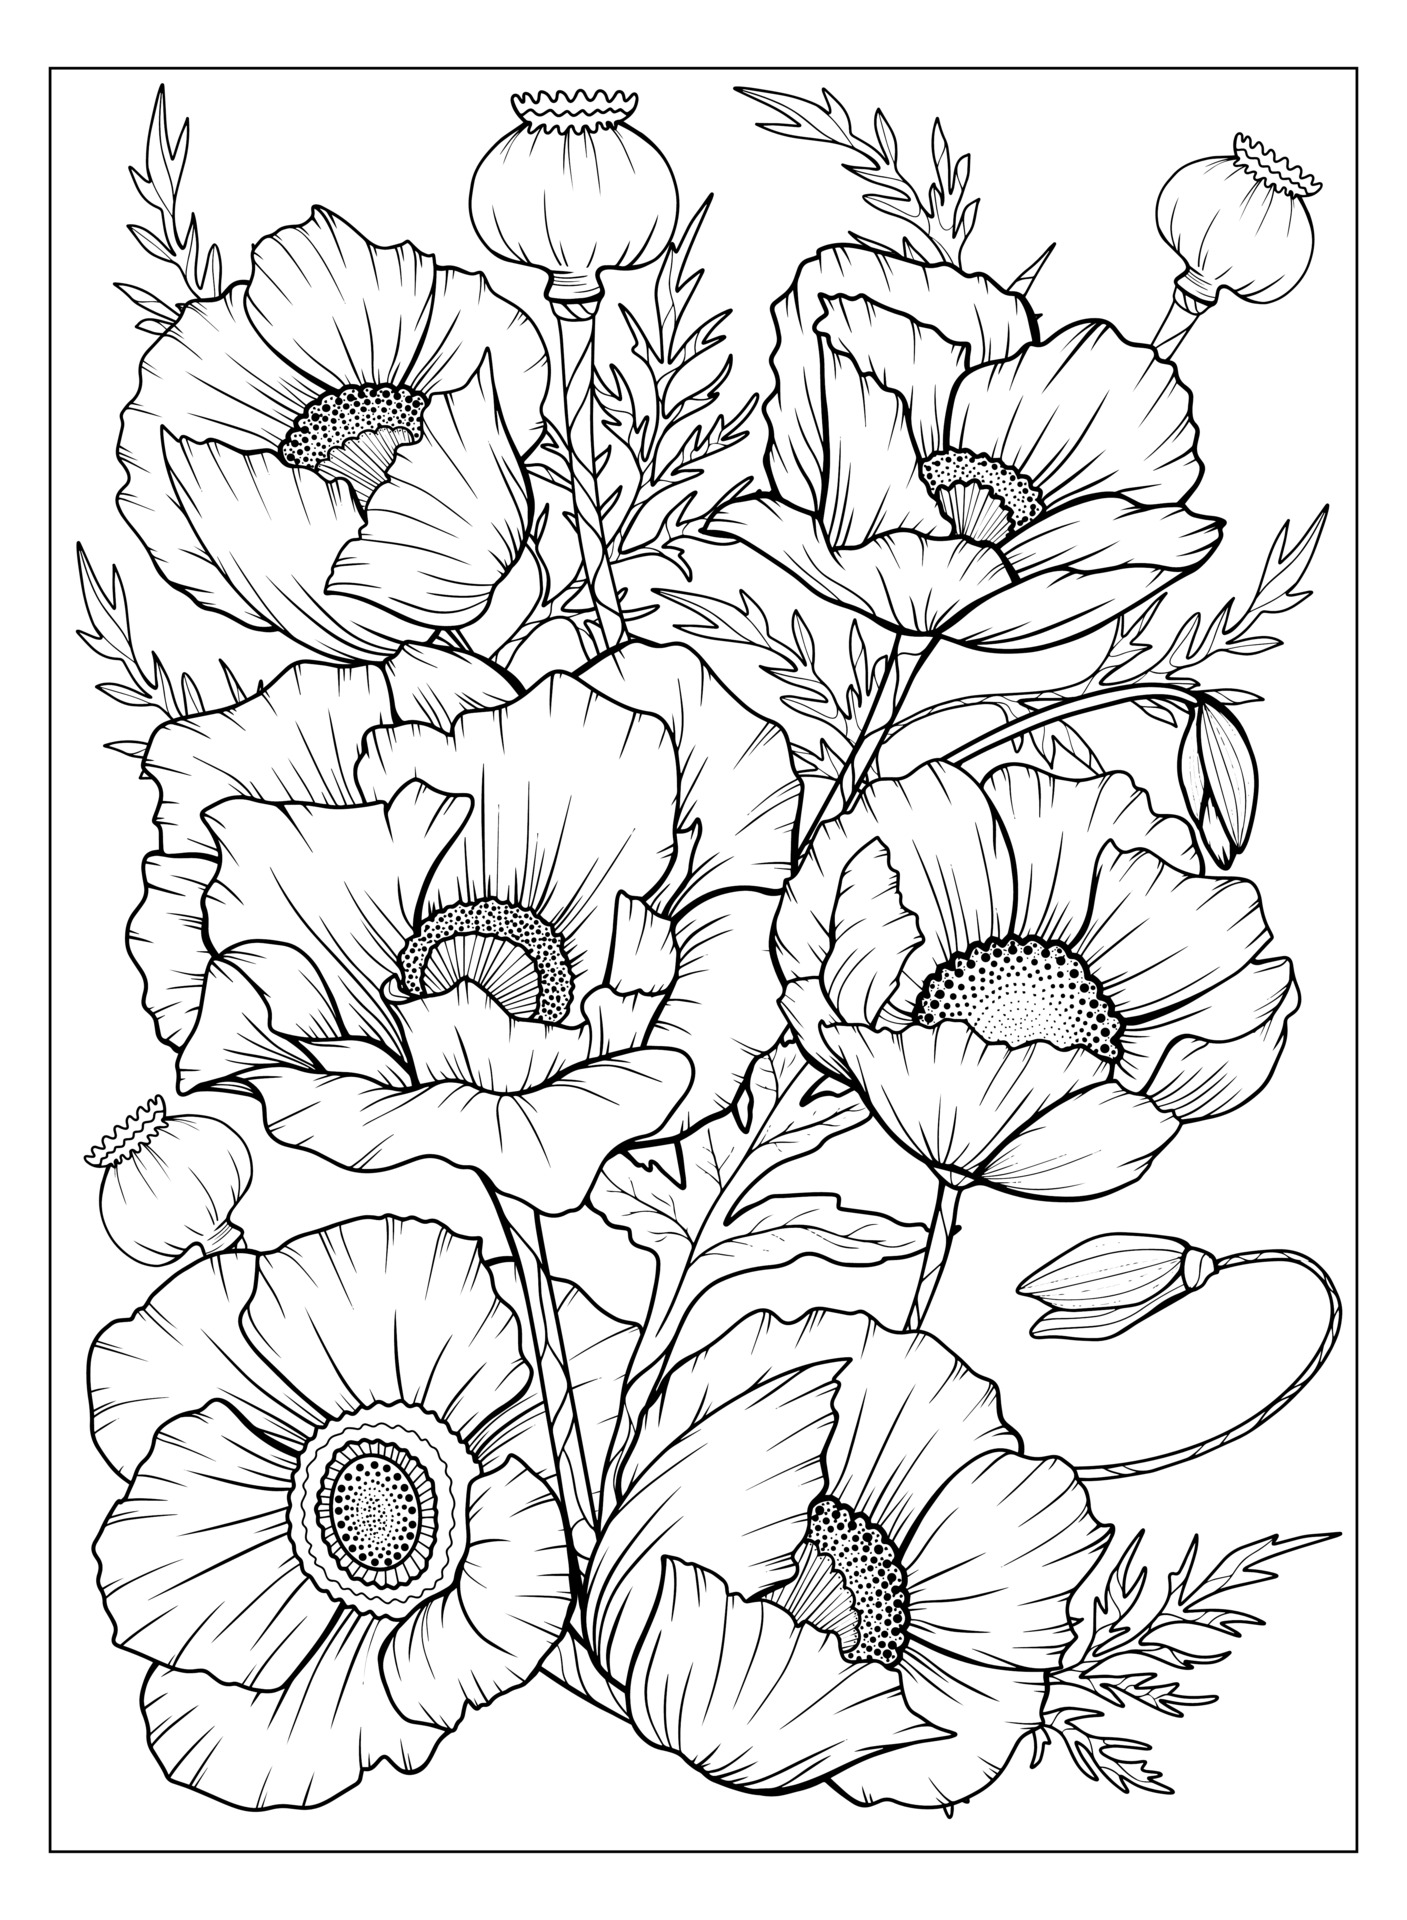 Coloring page with poppies and leaves. Vector page for coloring. Flower ...